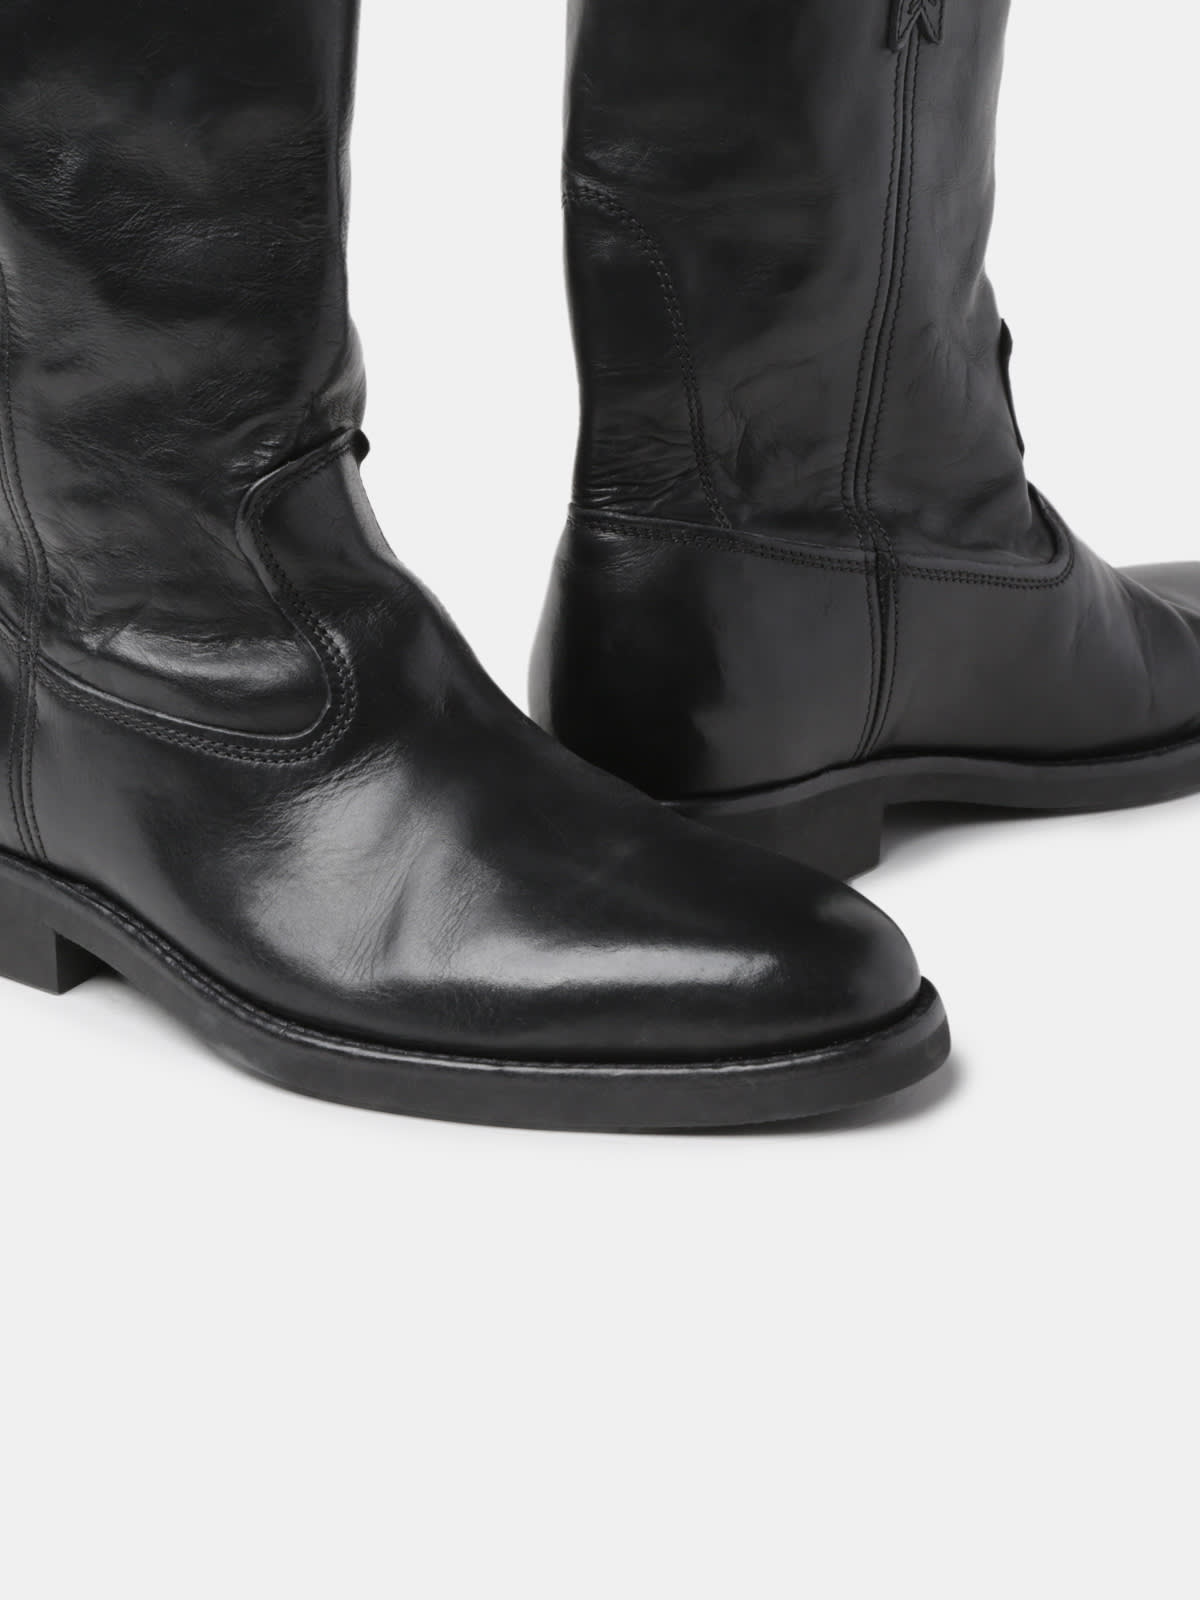 Biker boots in glossy black leather | Golden Goose